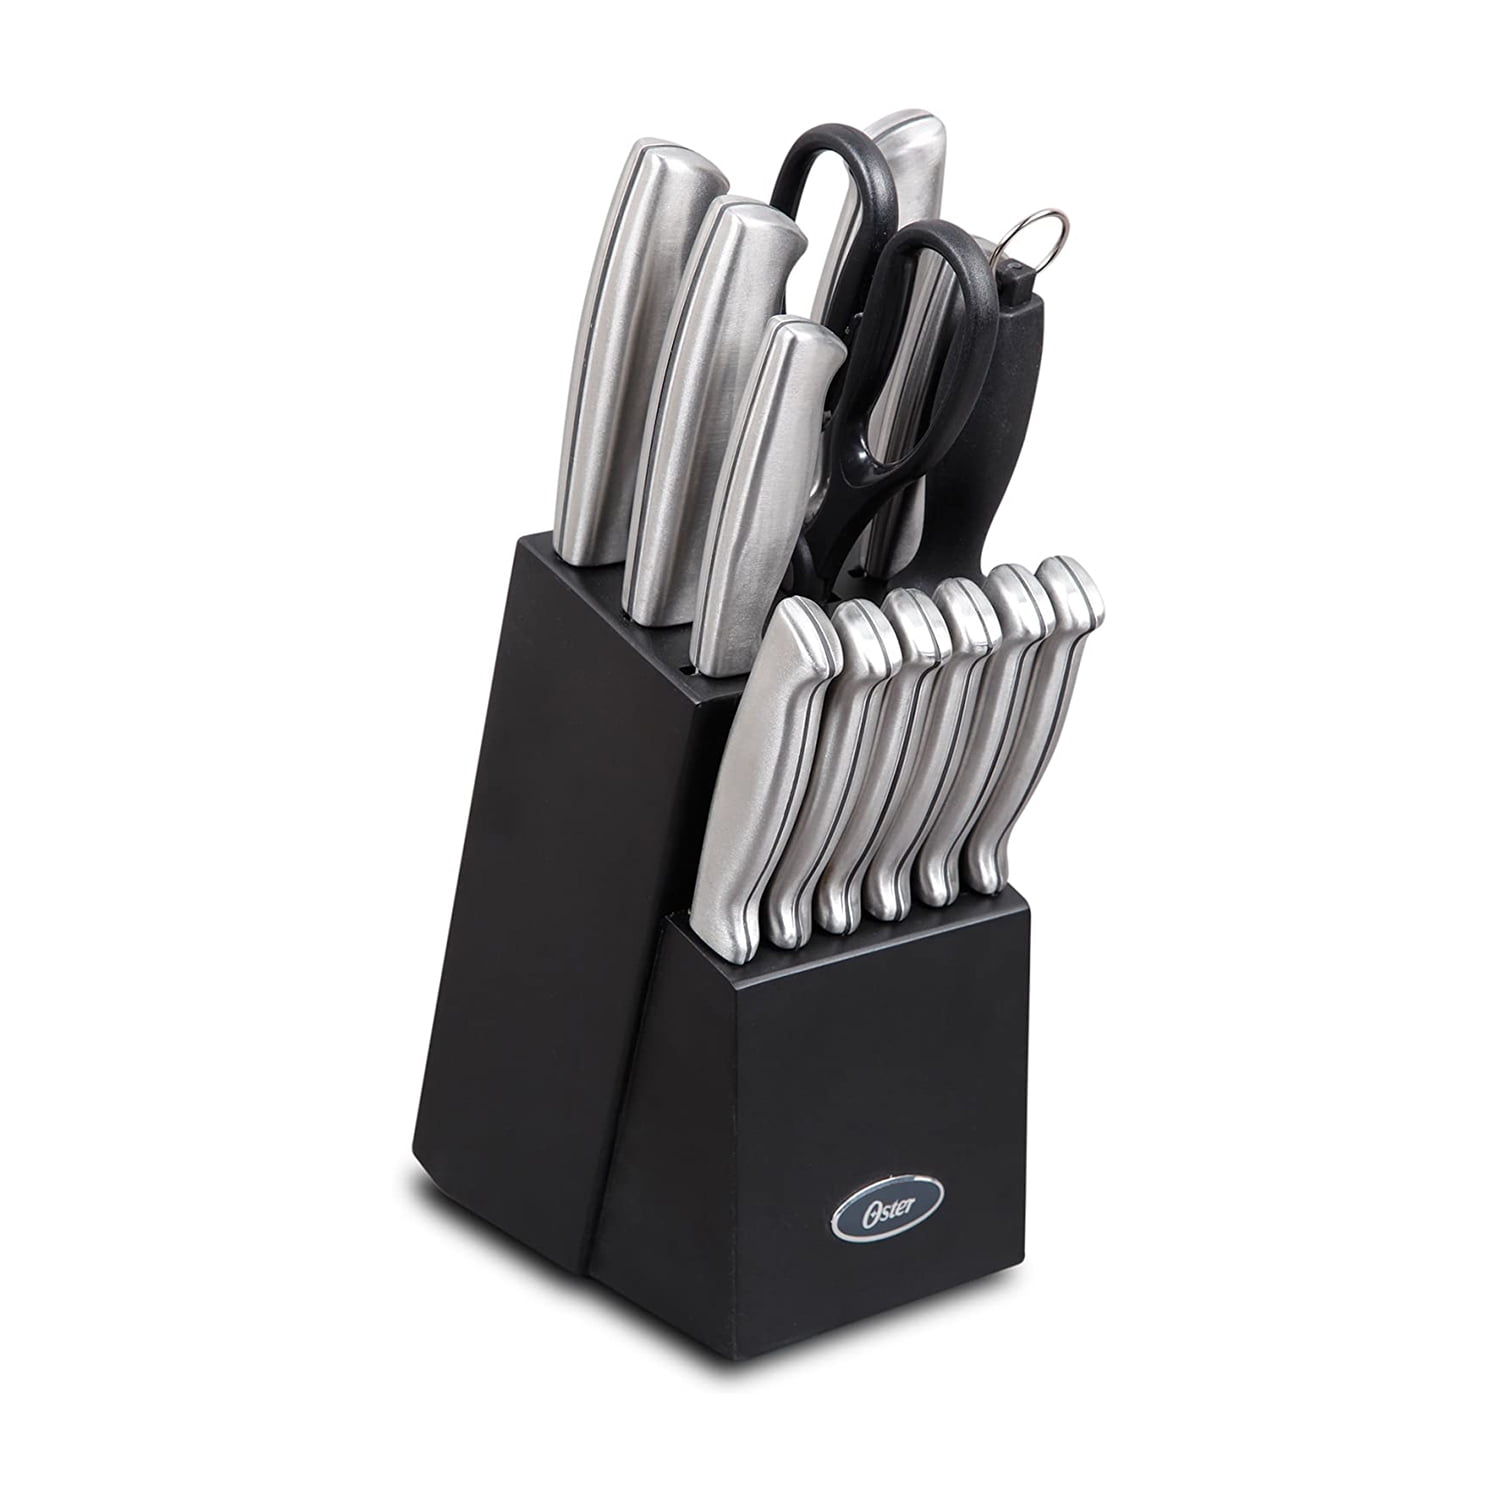 Costco everything - 6 Piece Skandia Truls Knife Set for $16.99